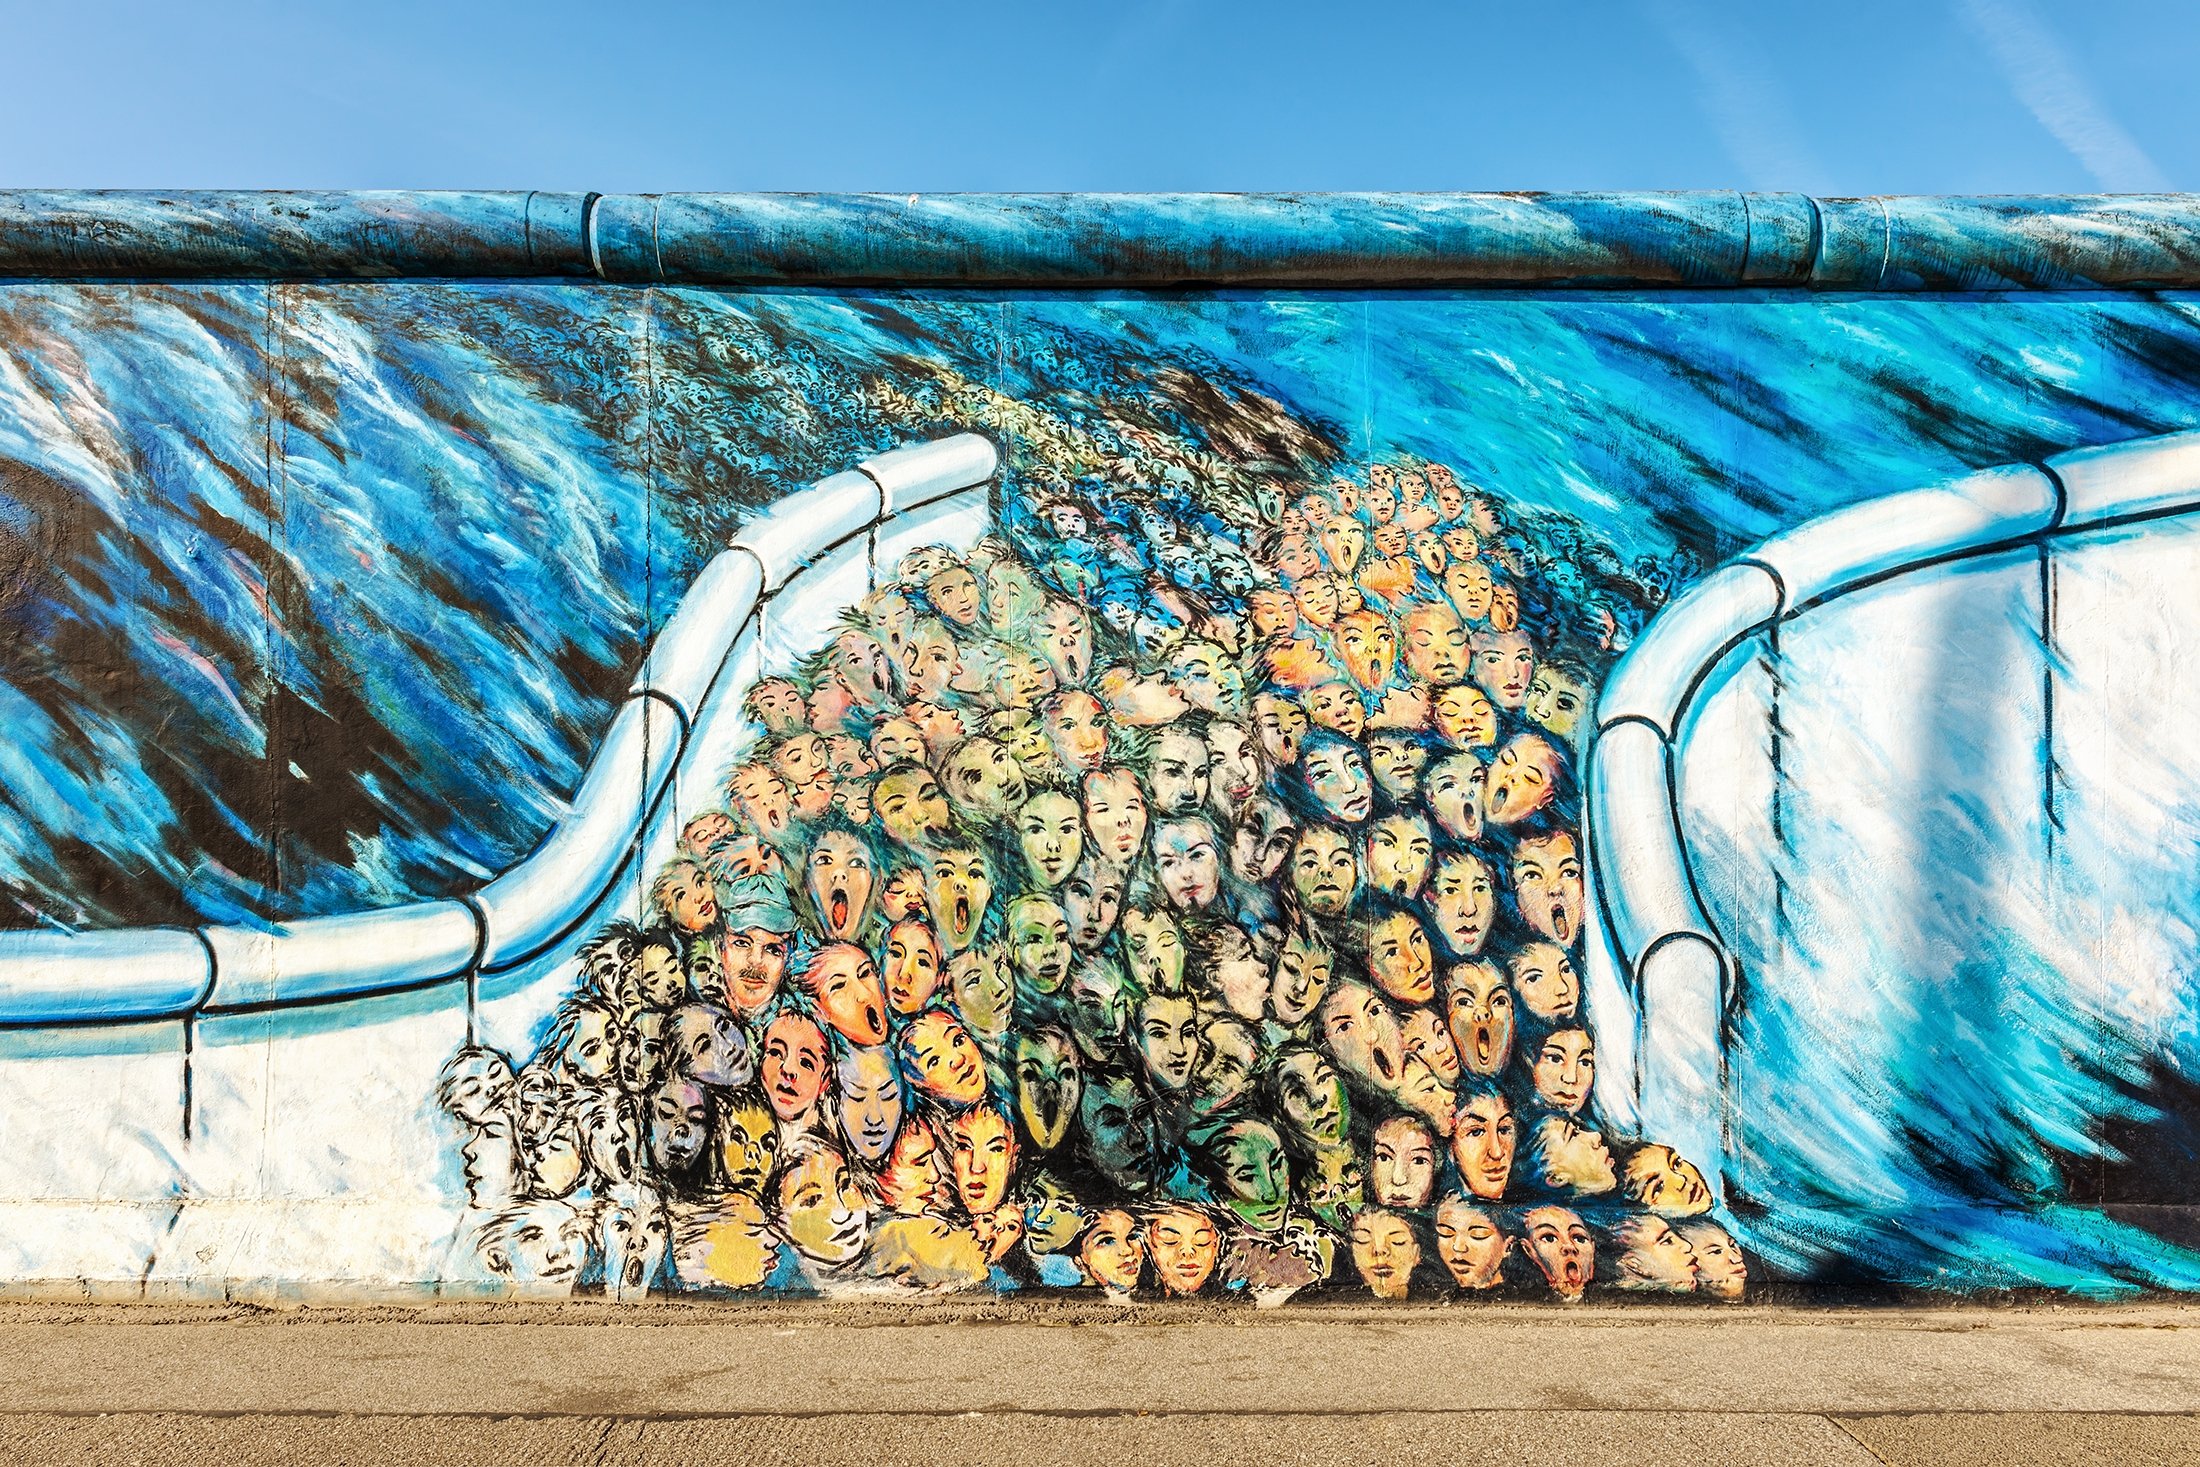 Graffiti art depicting people escaping East Berlin can be seen on a part of the original Berlin Wall at East Side Gallery in Berlin, Germany, Sept. 3, 2011. (Shutterstock Photo)